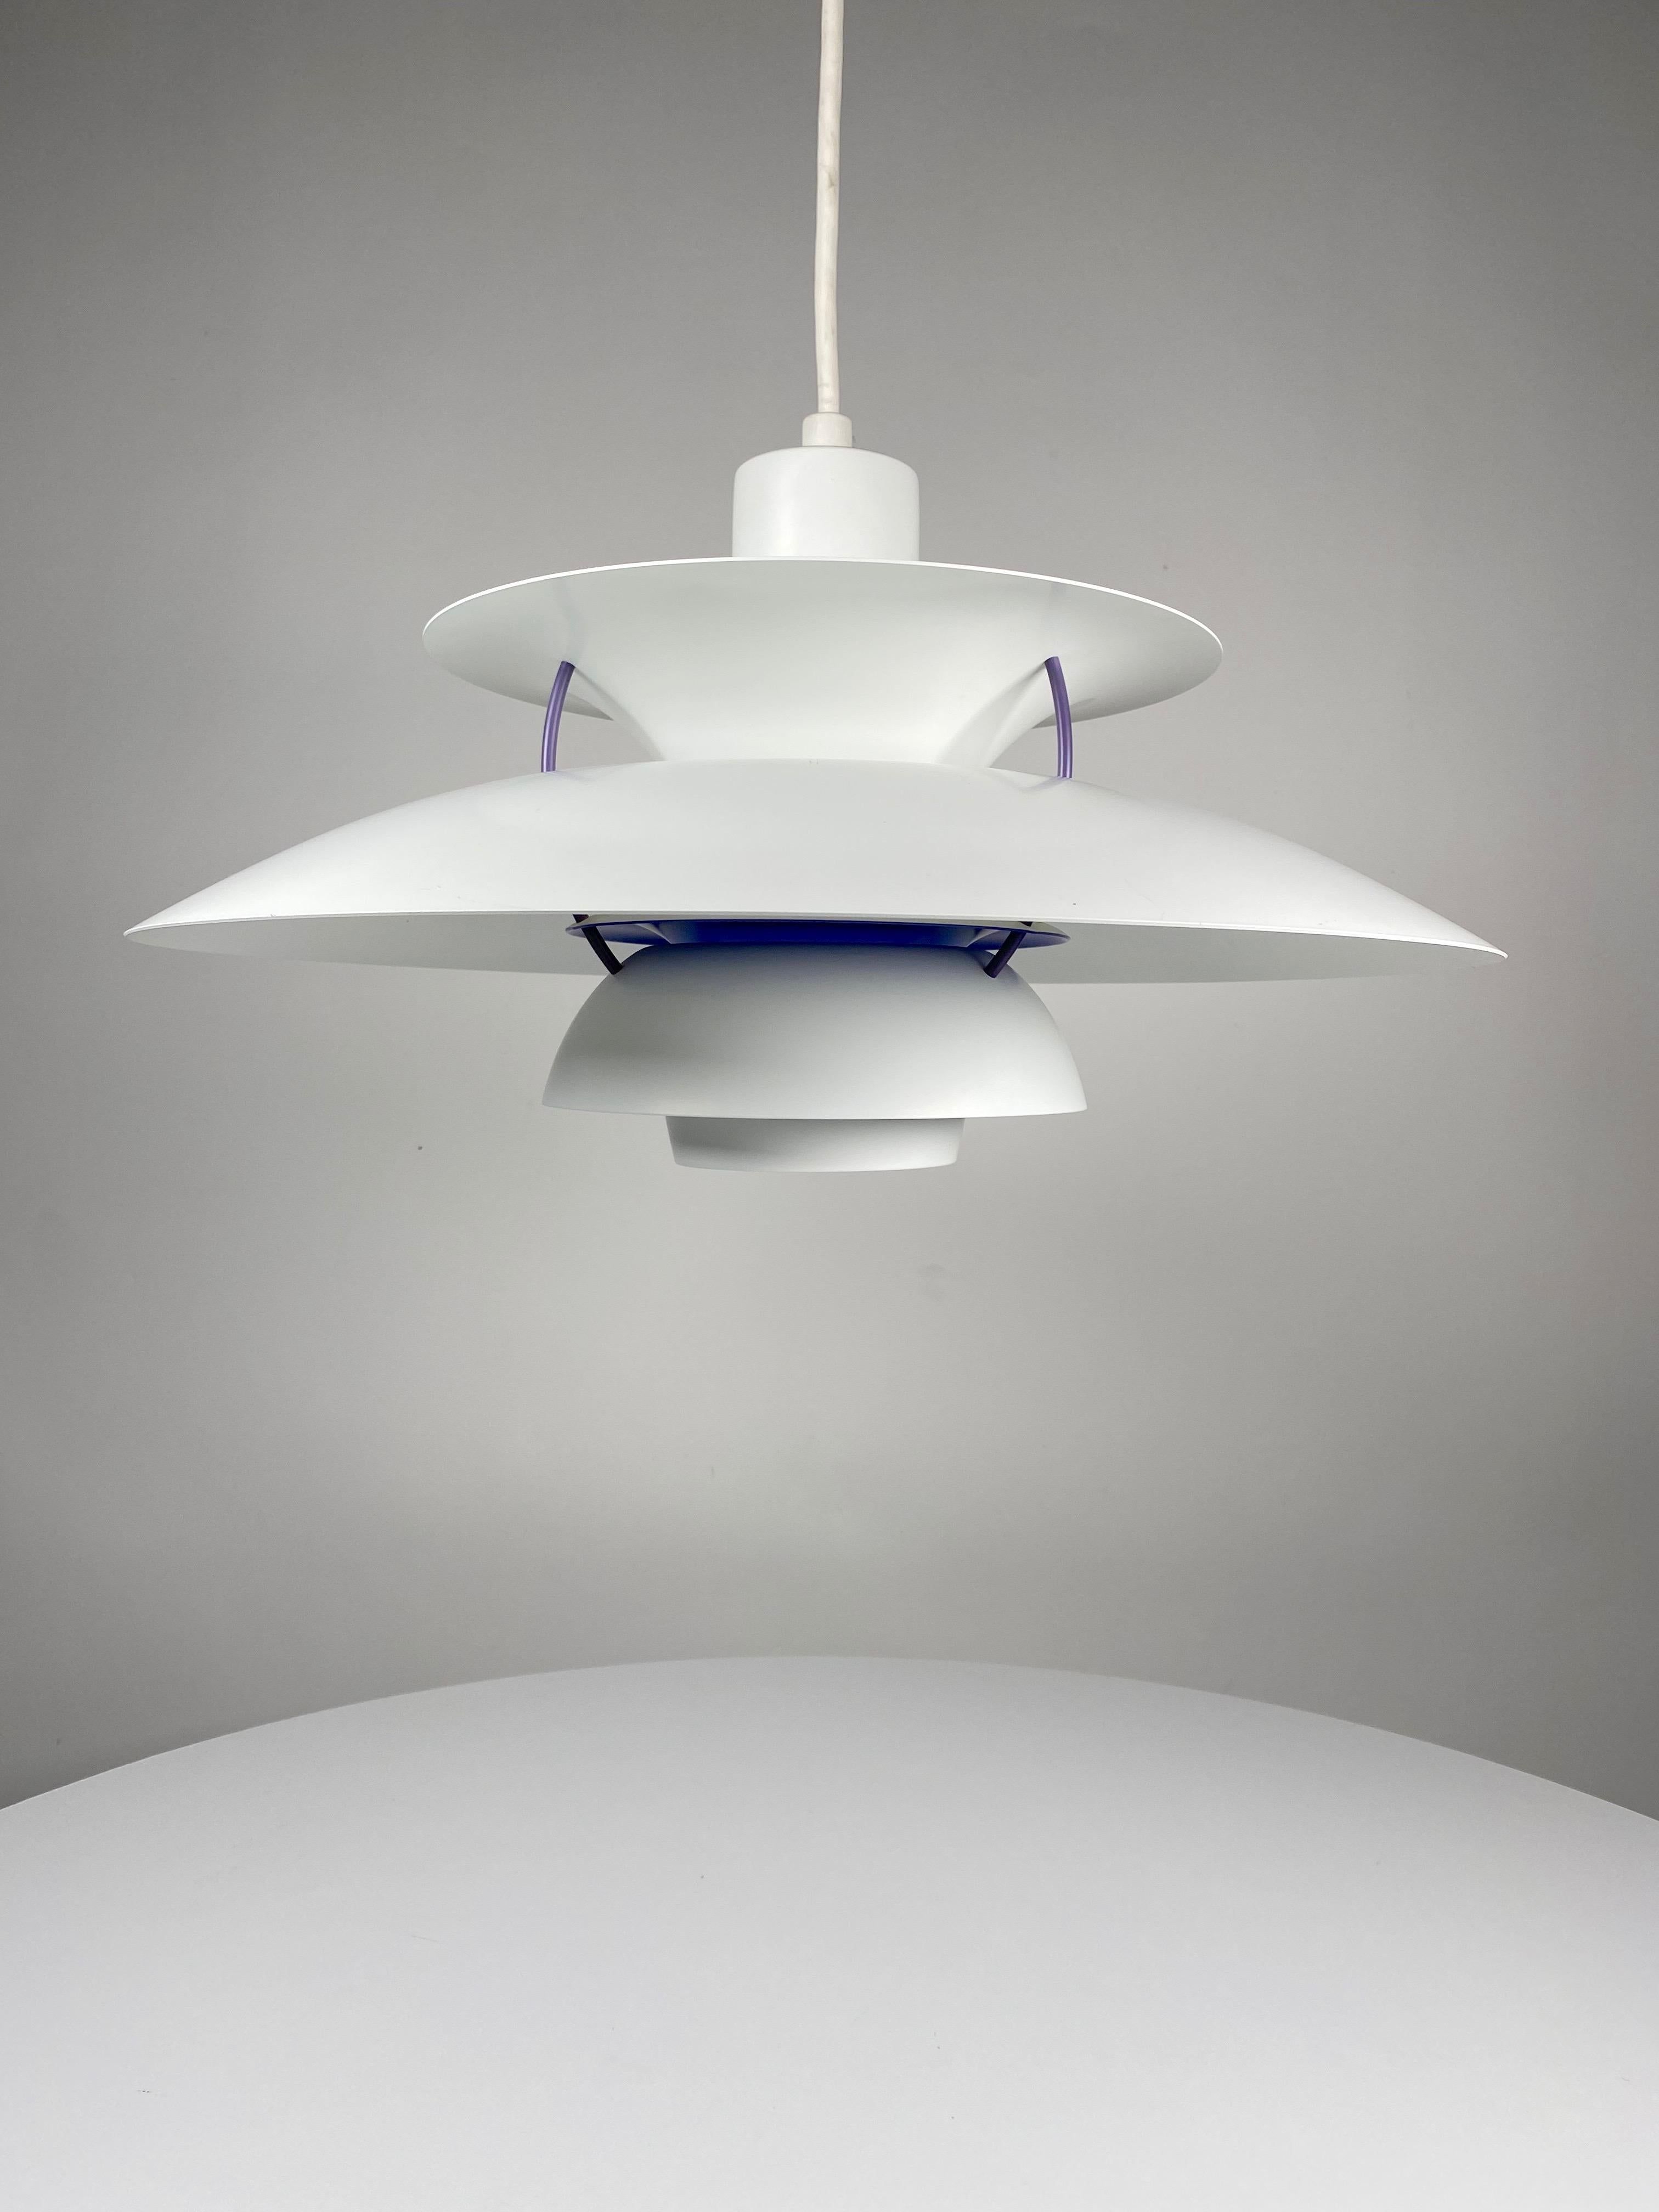 The PH 5 pendant lamp by Poul Henningson (1894-1967), Danish architect and designer, the invertor of the PH series lamps, know for their glare free design which produce a soft warm even light. The lamps are produced by the Louis Poulsen and Company